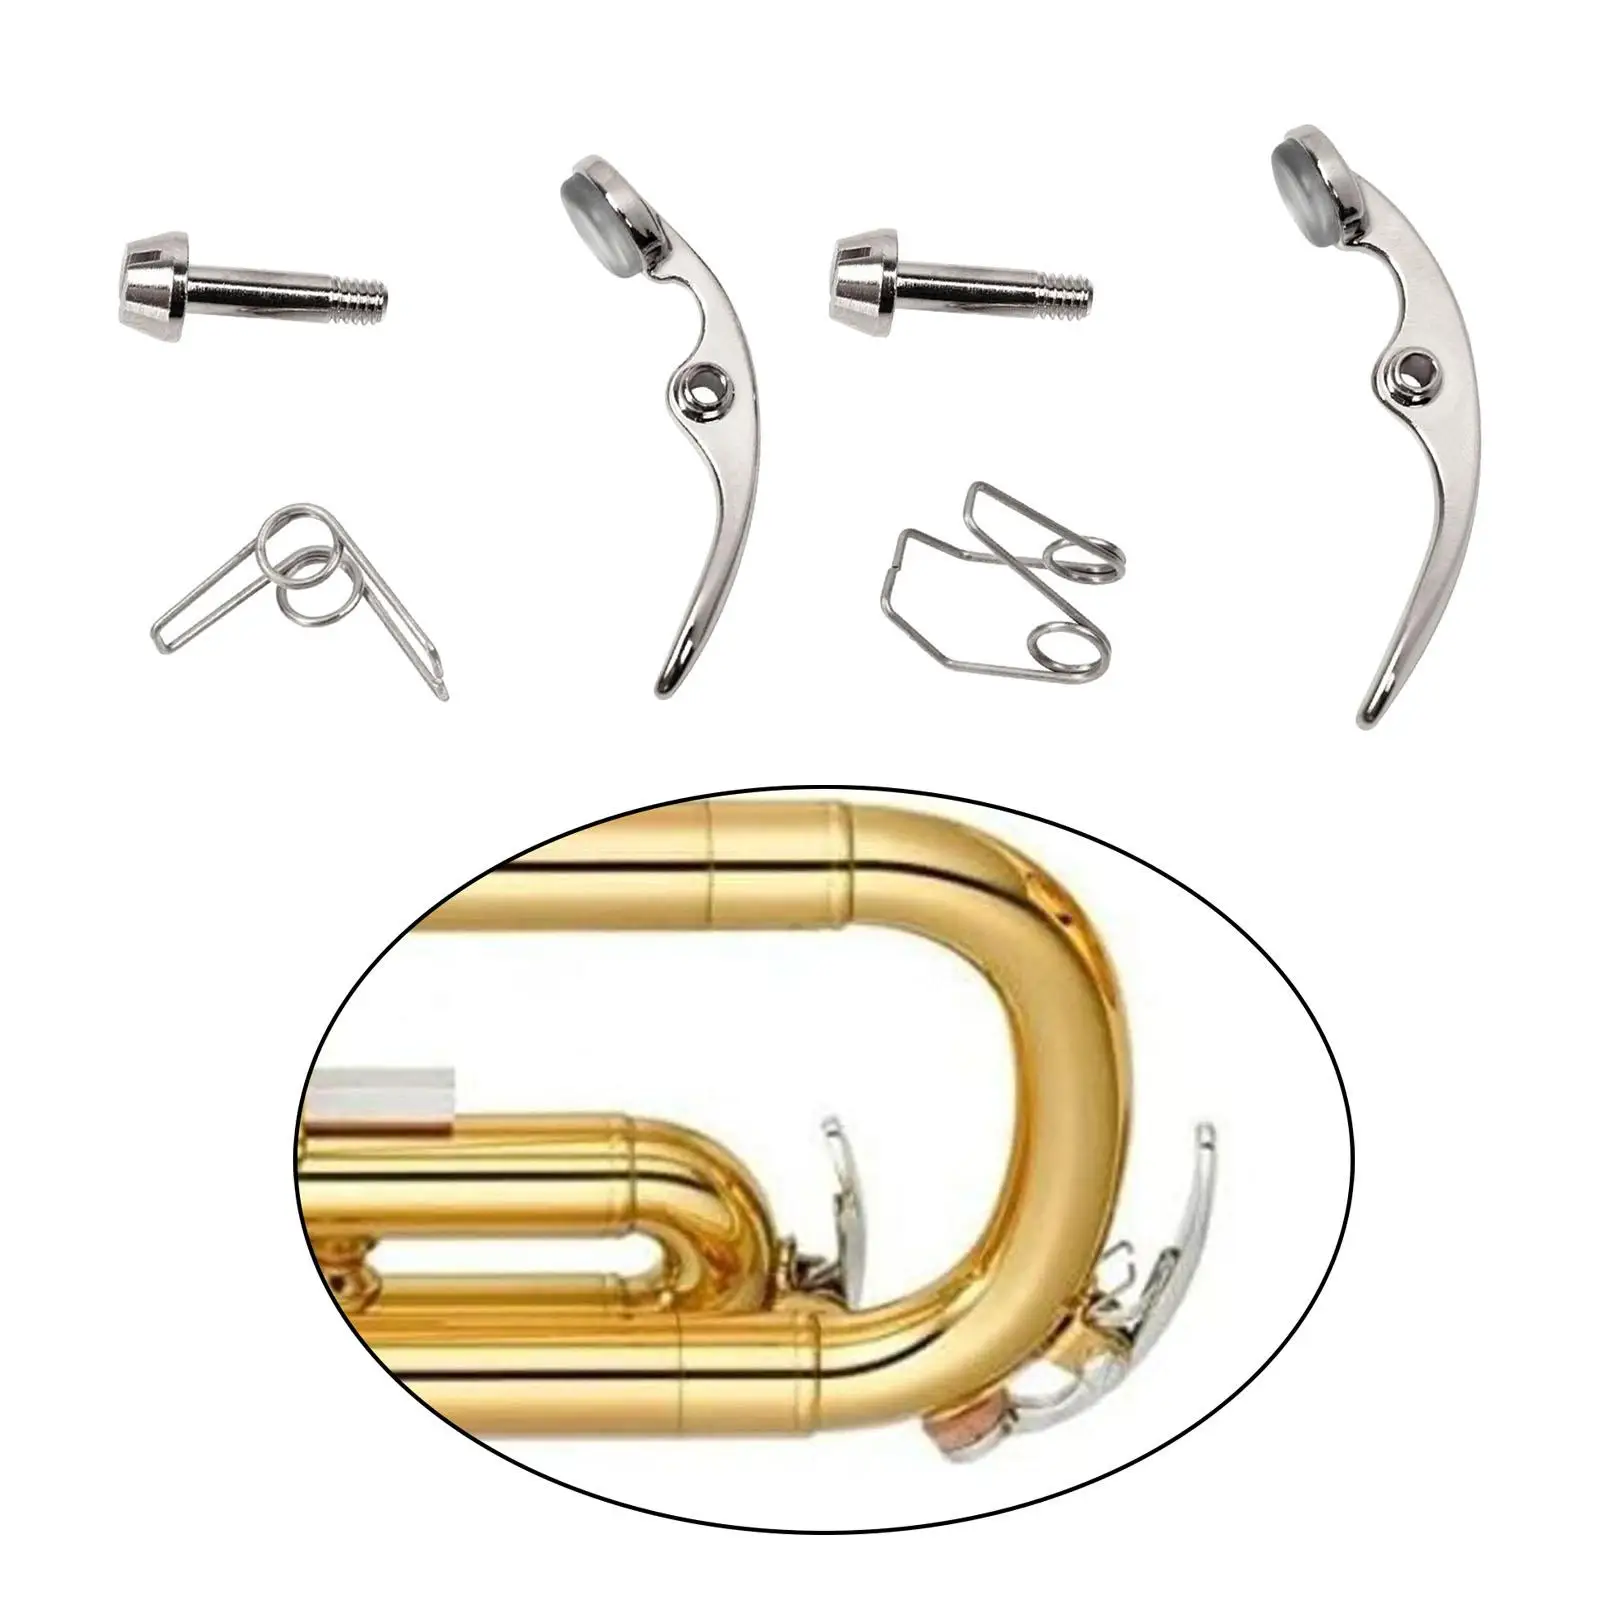 Trumpet Water Keys Replacement Parts Portable Wind Instruments Accessory with Springs Screws Repair Kits for Trombone Trumpet